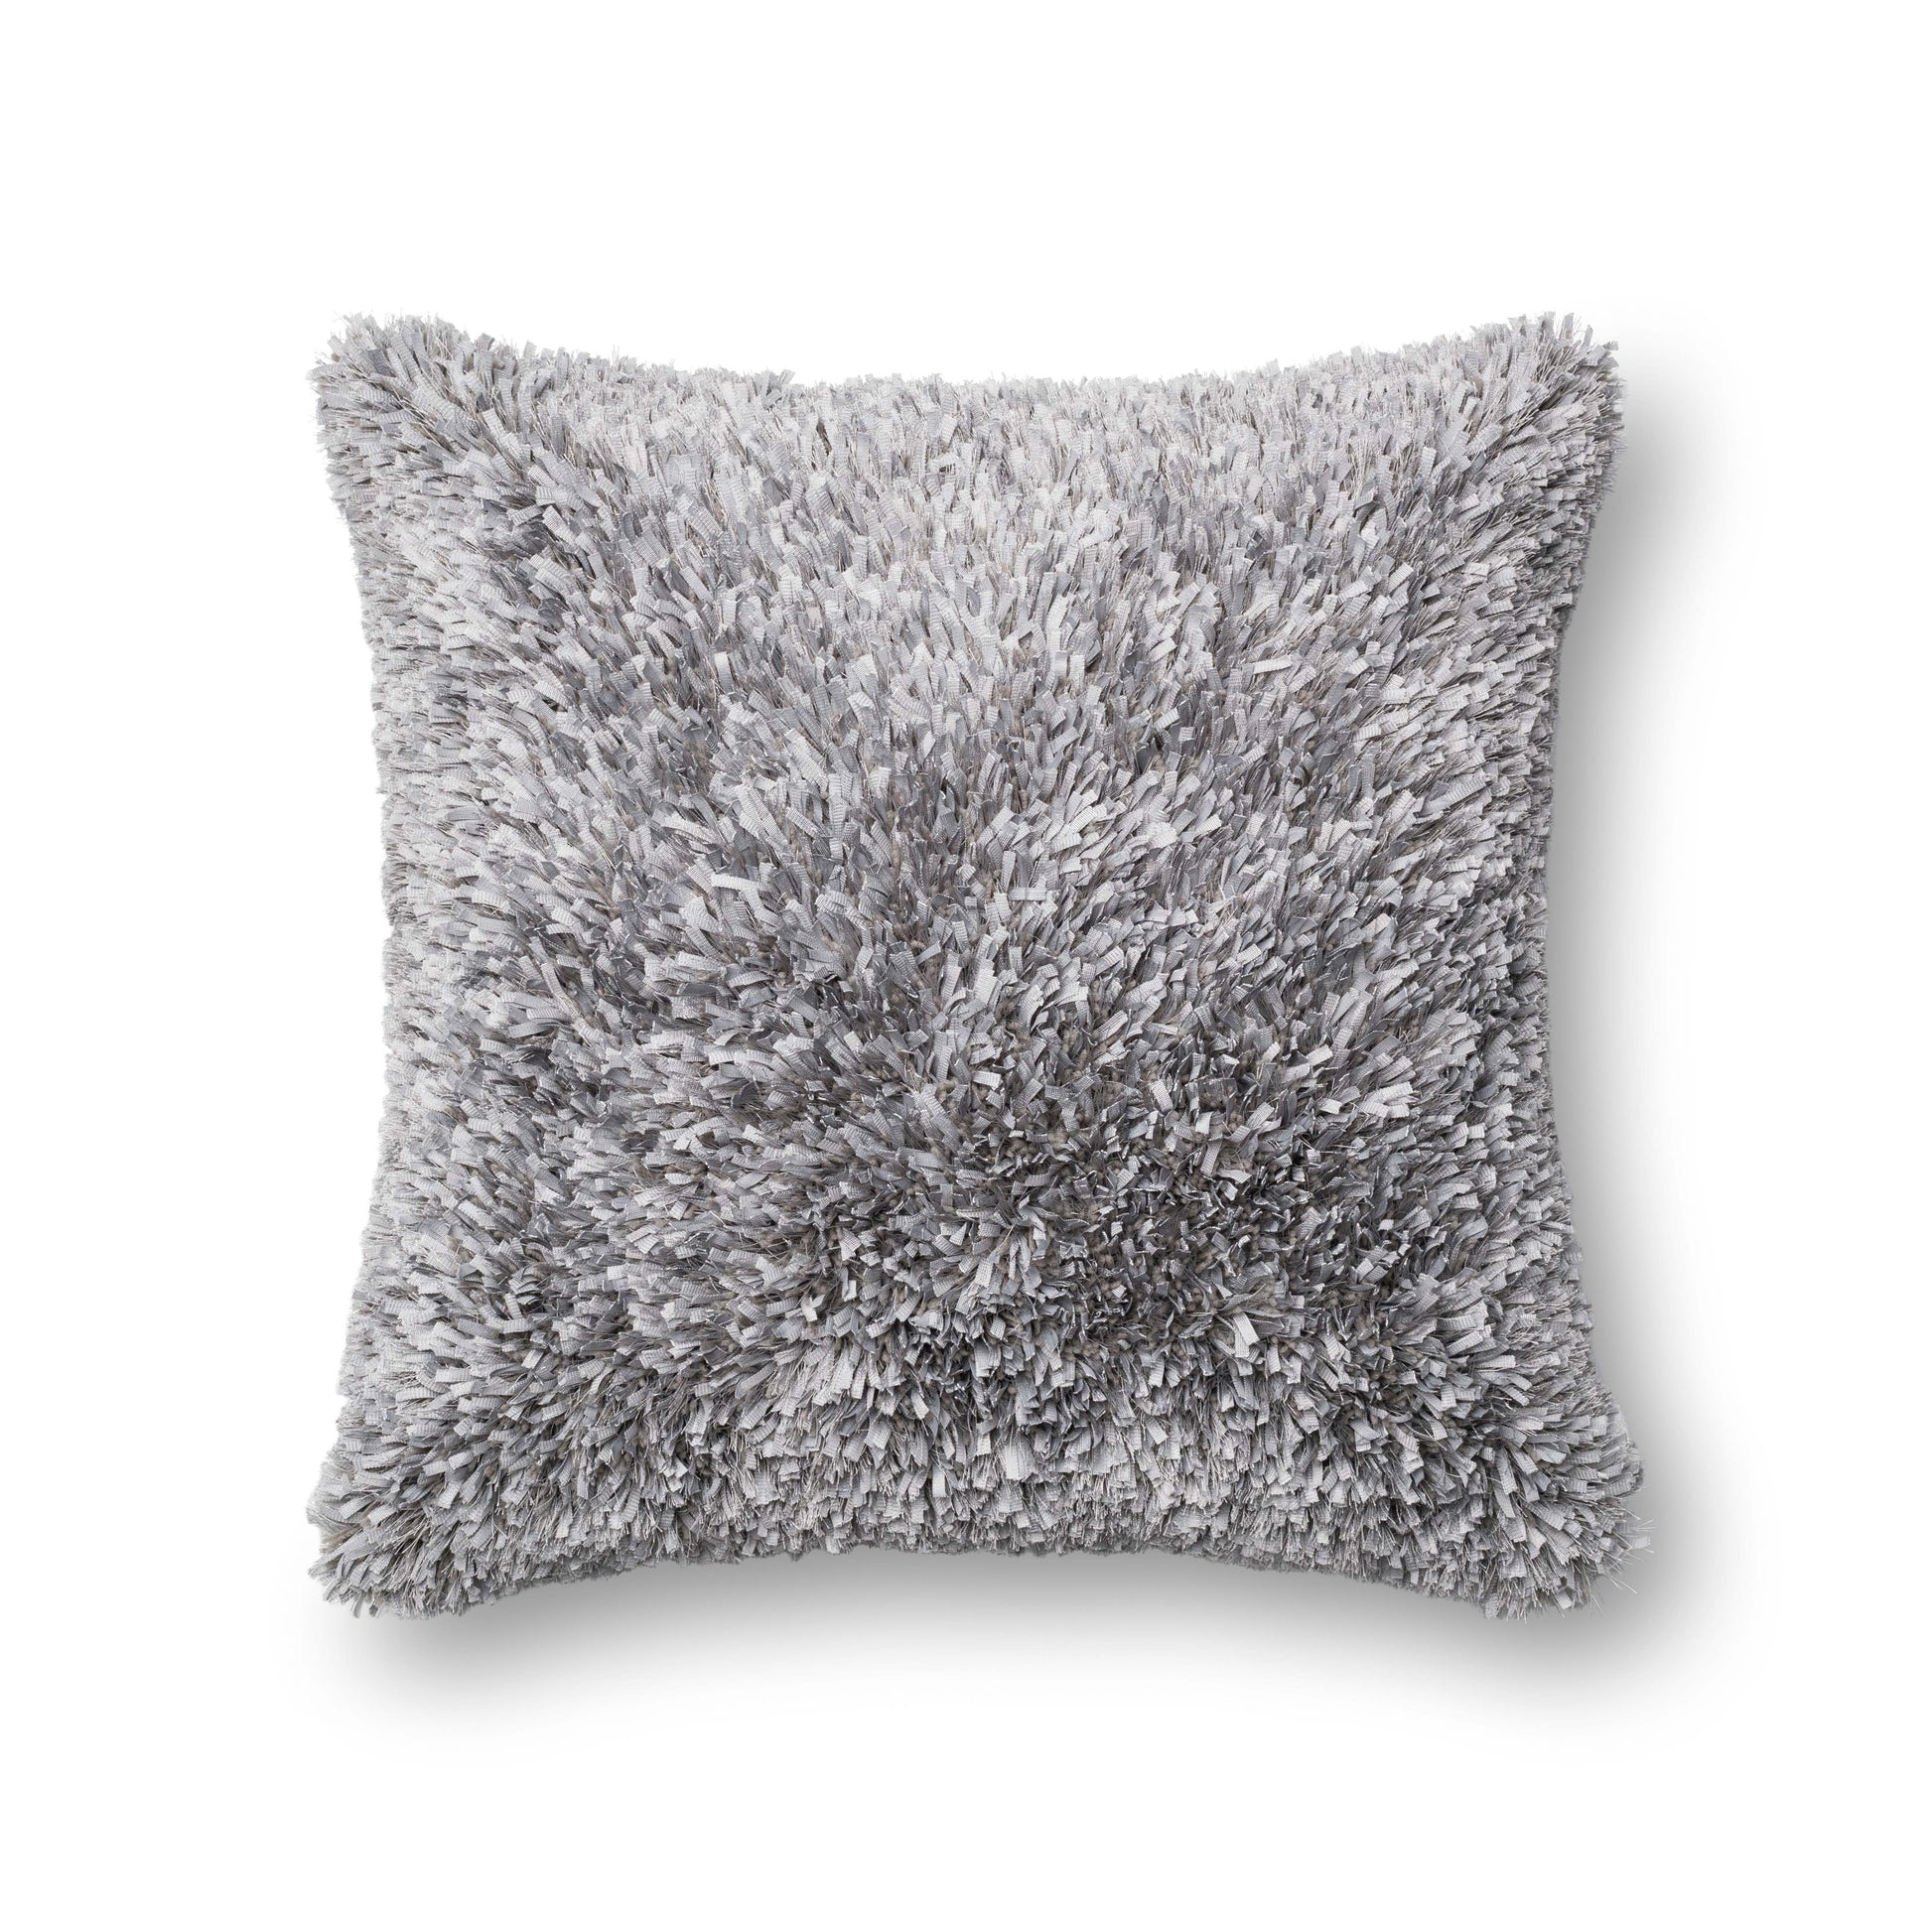 Photo of a pillow;  P0045 Grey 22" x 22" Cover w/Poly Pillow